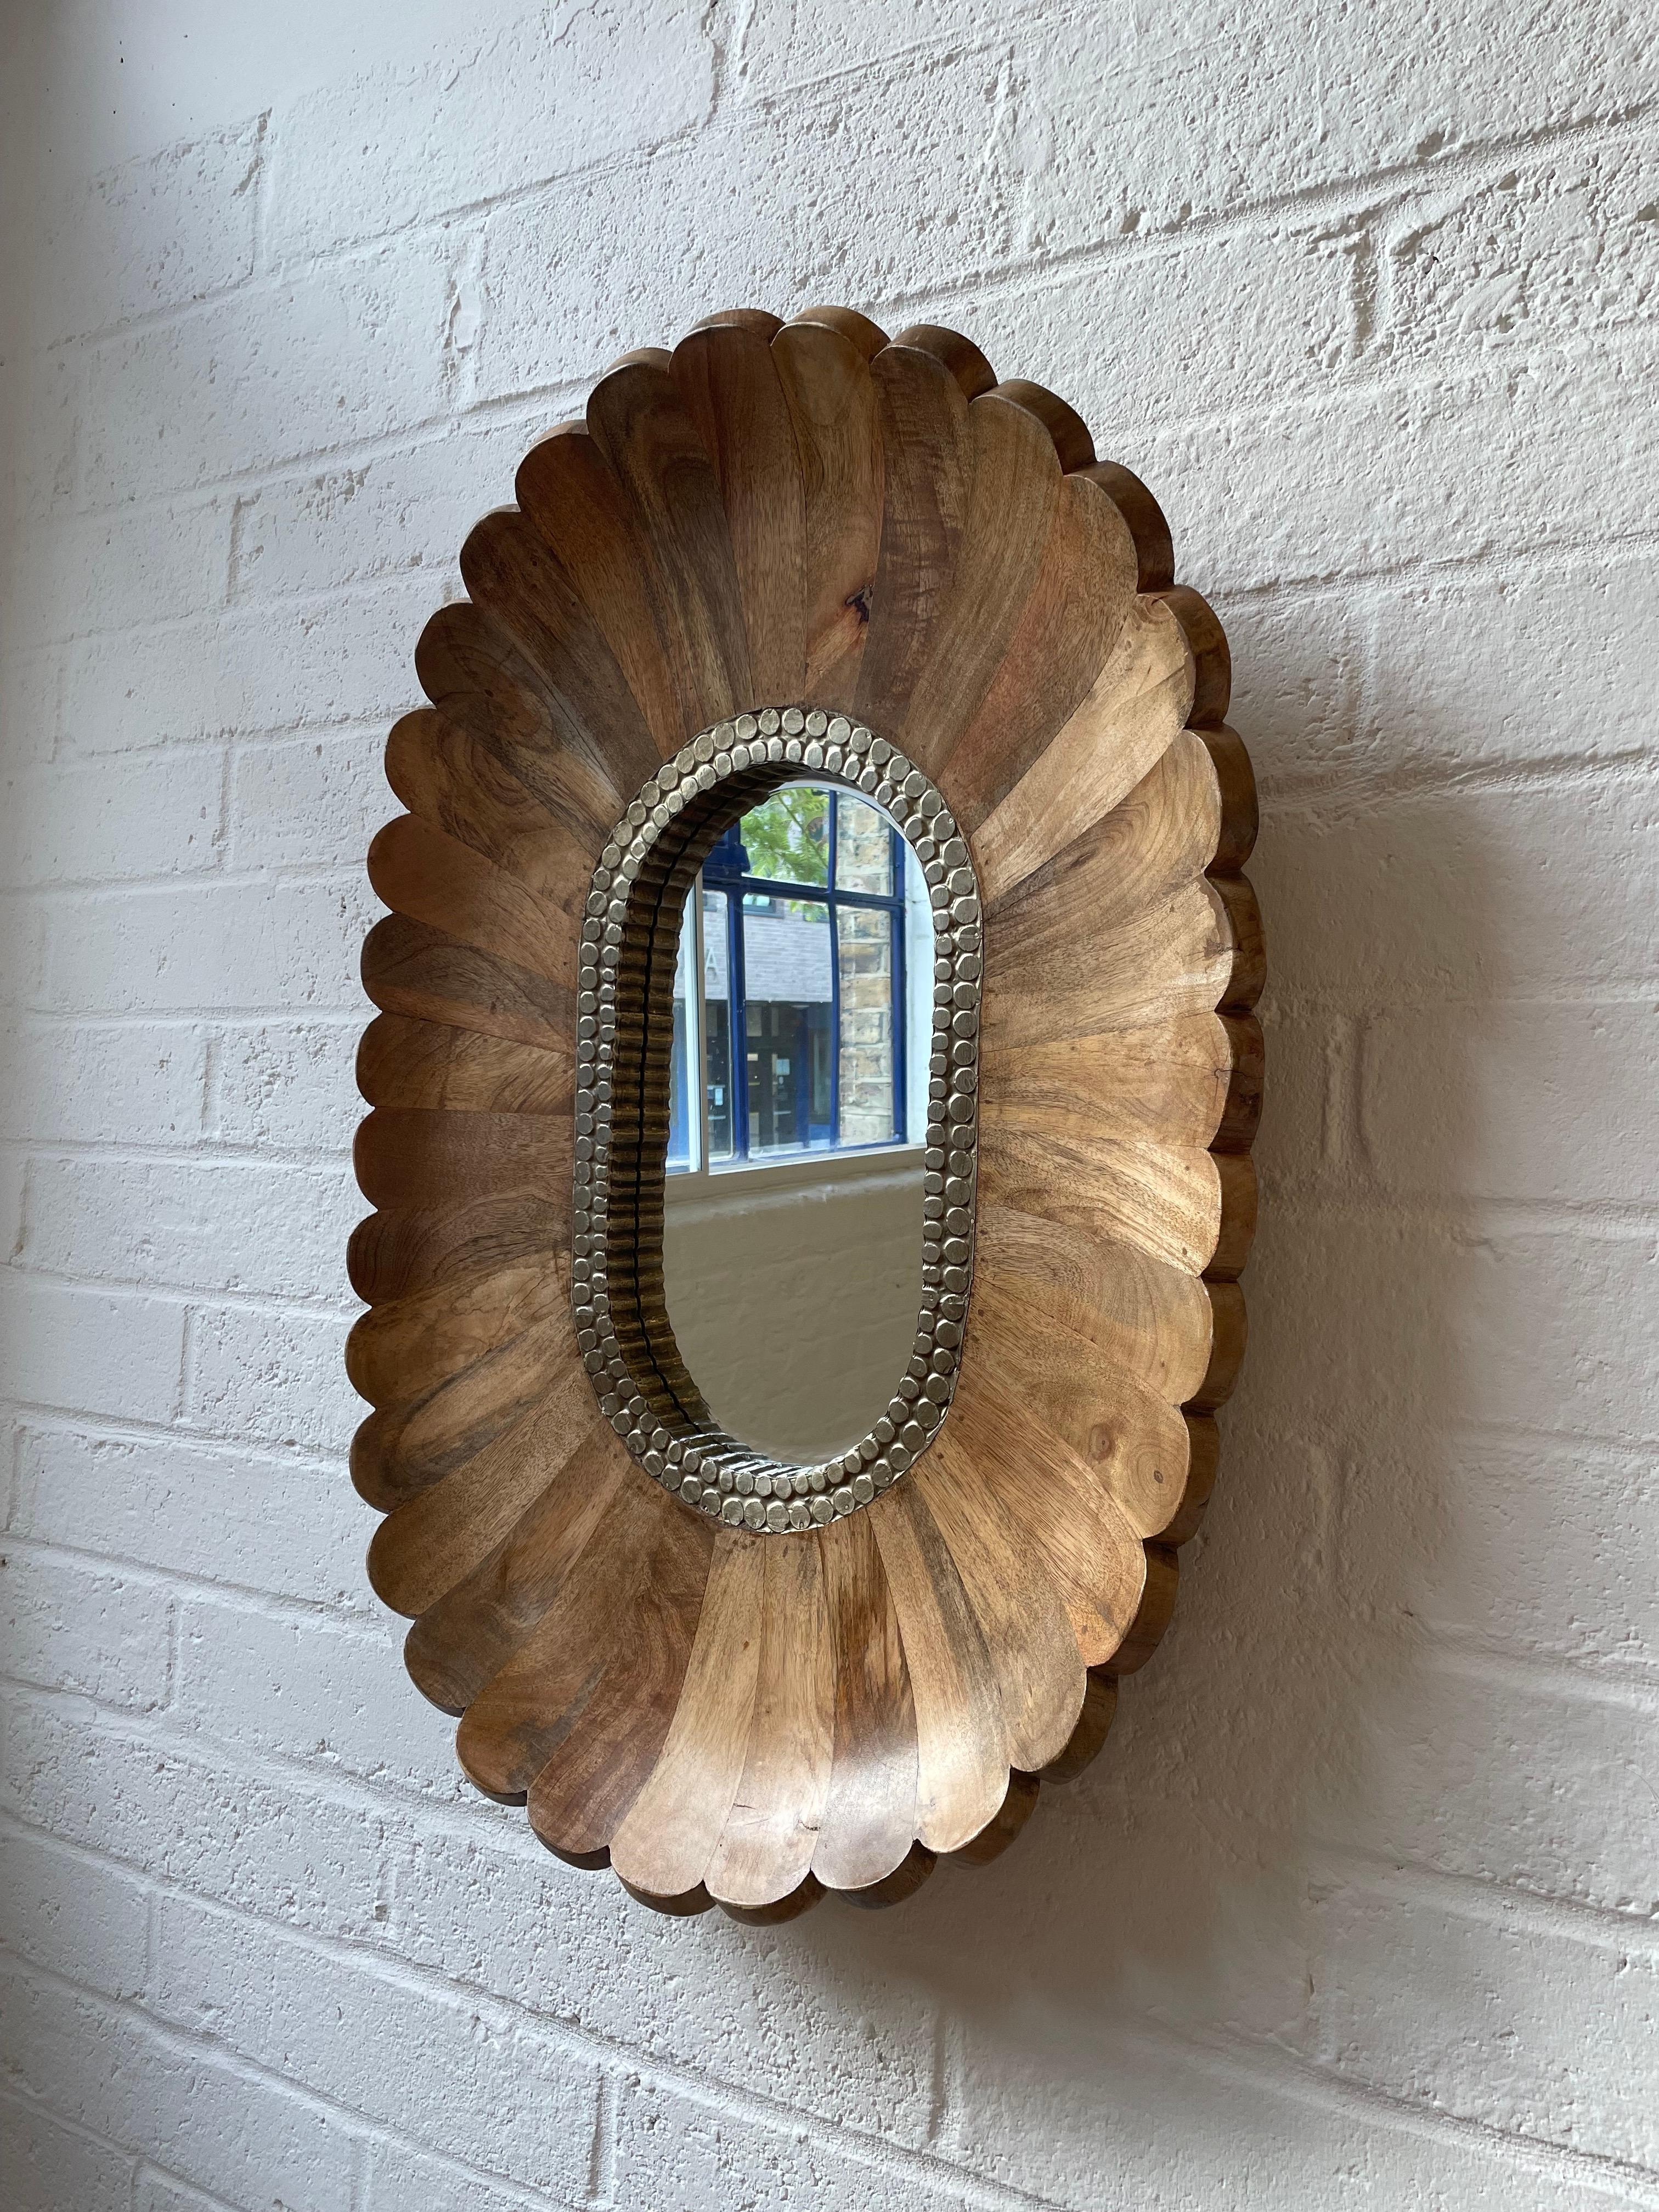 Floral Wooden Wall Mirror In Excellent Condition For Sale In London, England